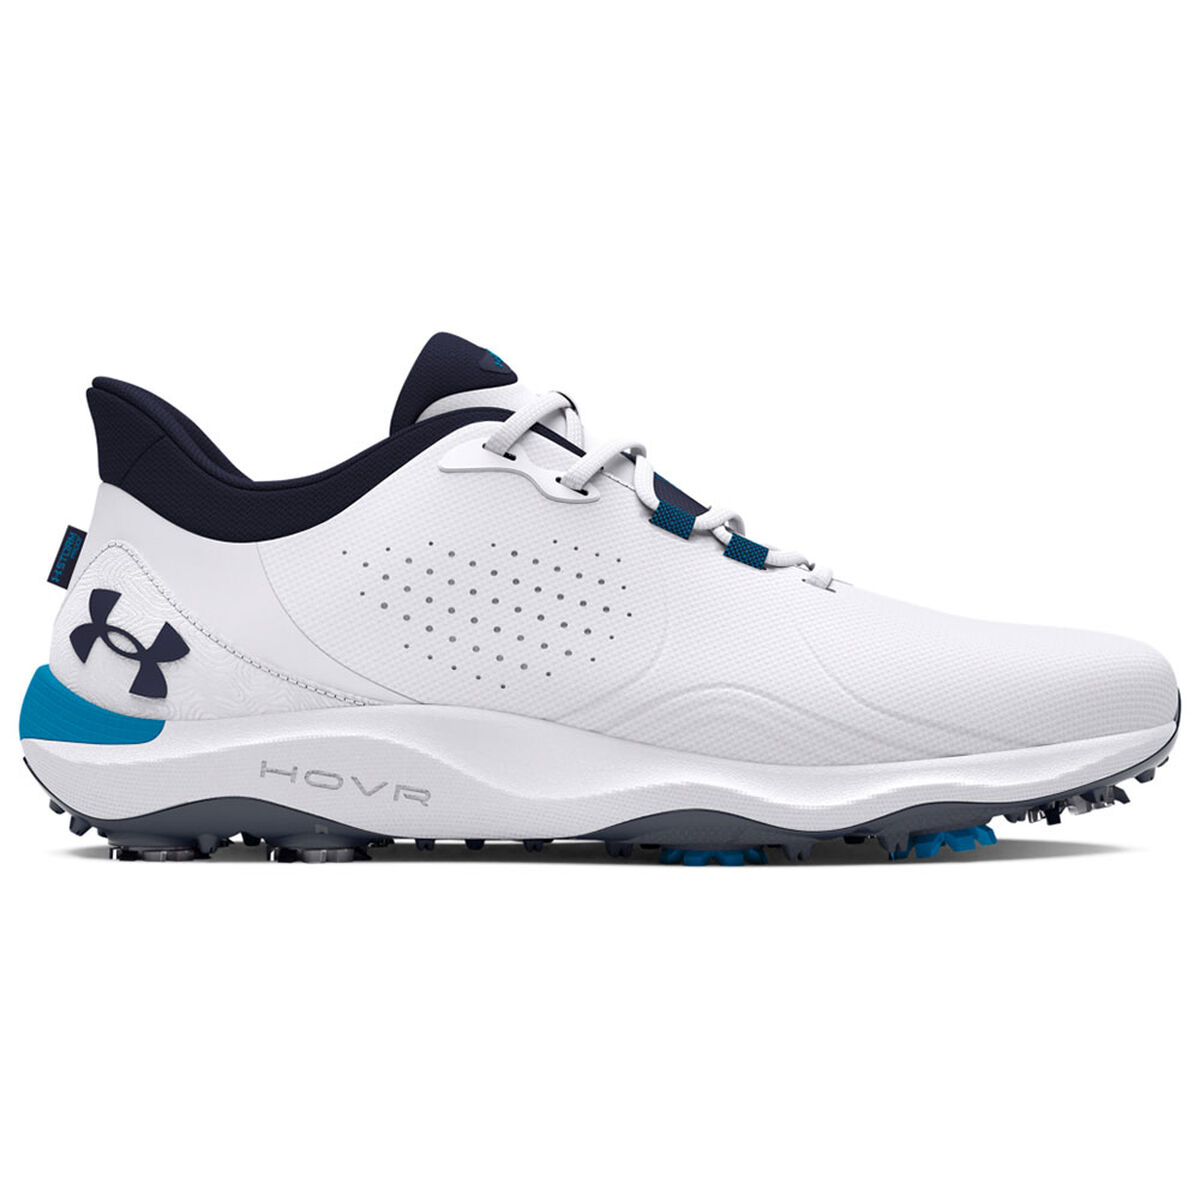 Under Armour Men’s Drive Pro Waterproof Spiked Golf Shoes, Mens, White/capri/midnight navy, 6 | American Golf